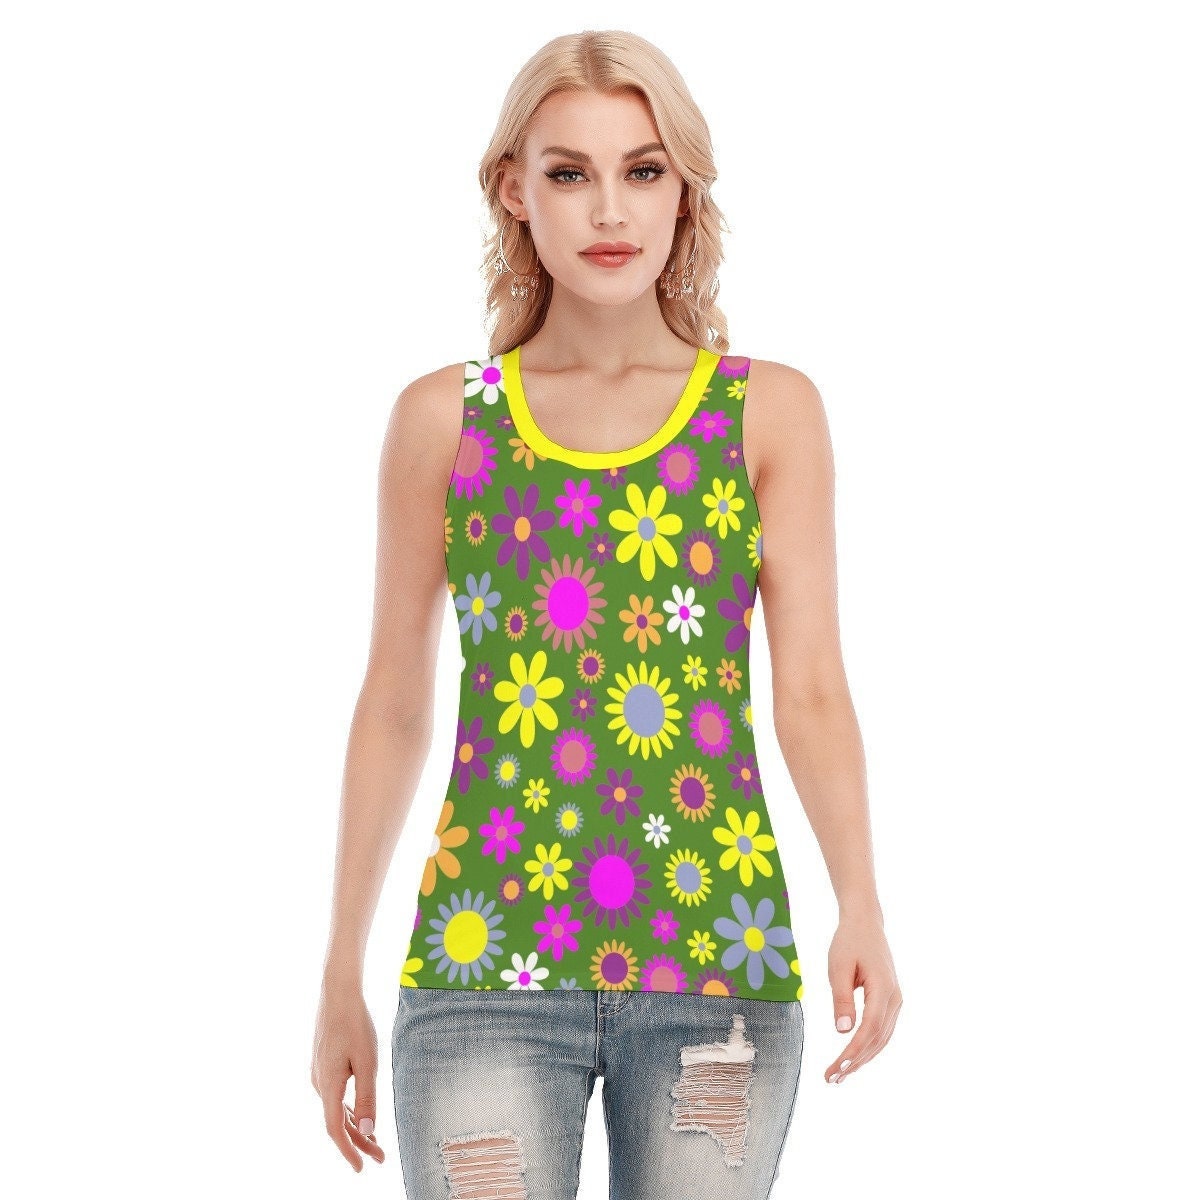 Retro Tank Tops, Mod Tops , 60s Style Tops, Olive Green Tank Top, Floral Tank Top, Womens Tank Tops,Retro Tops, Sleeveless Top,70s Style Top